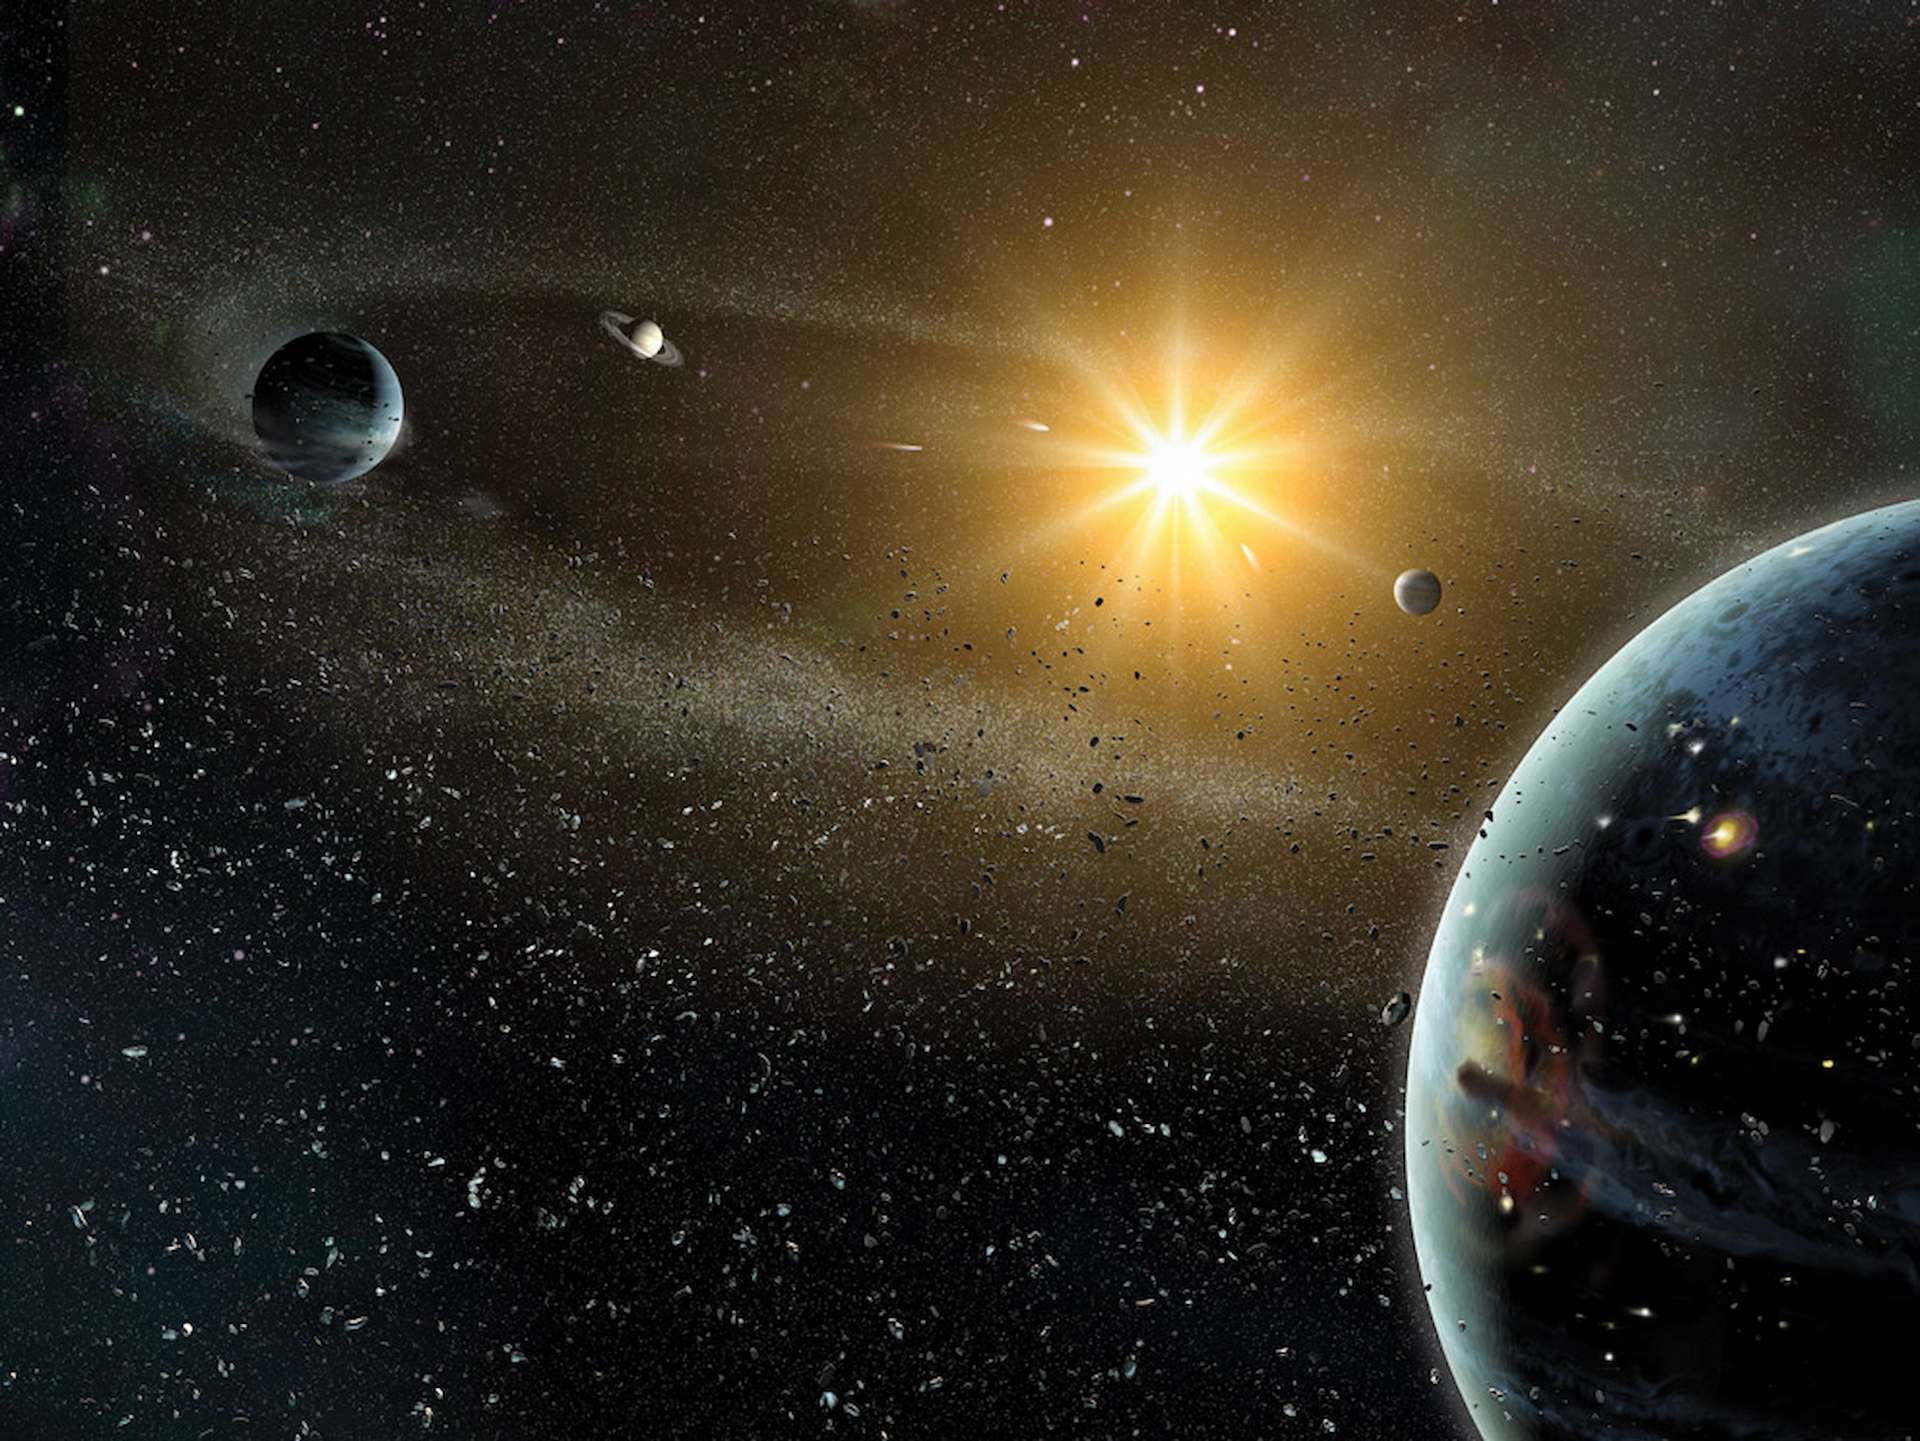 They list planetary systems that likely developed life